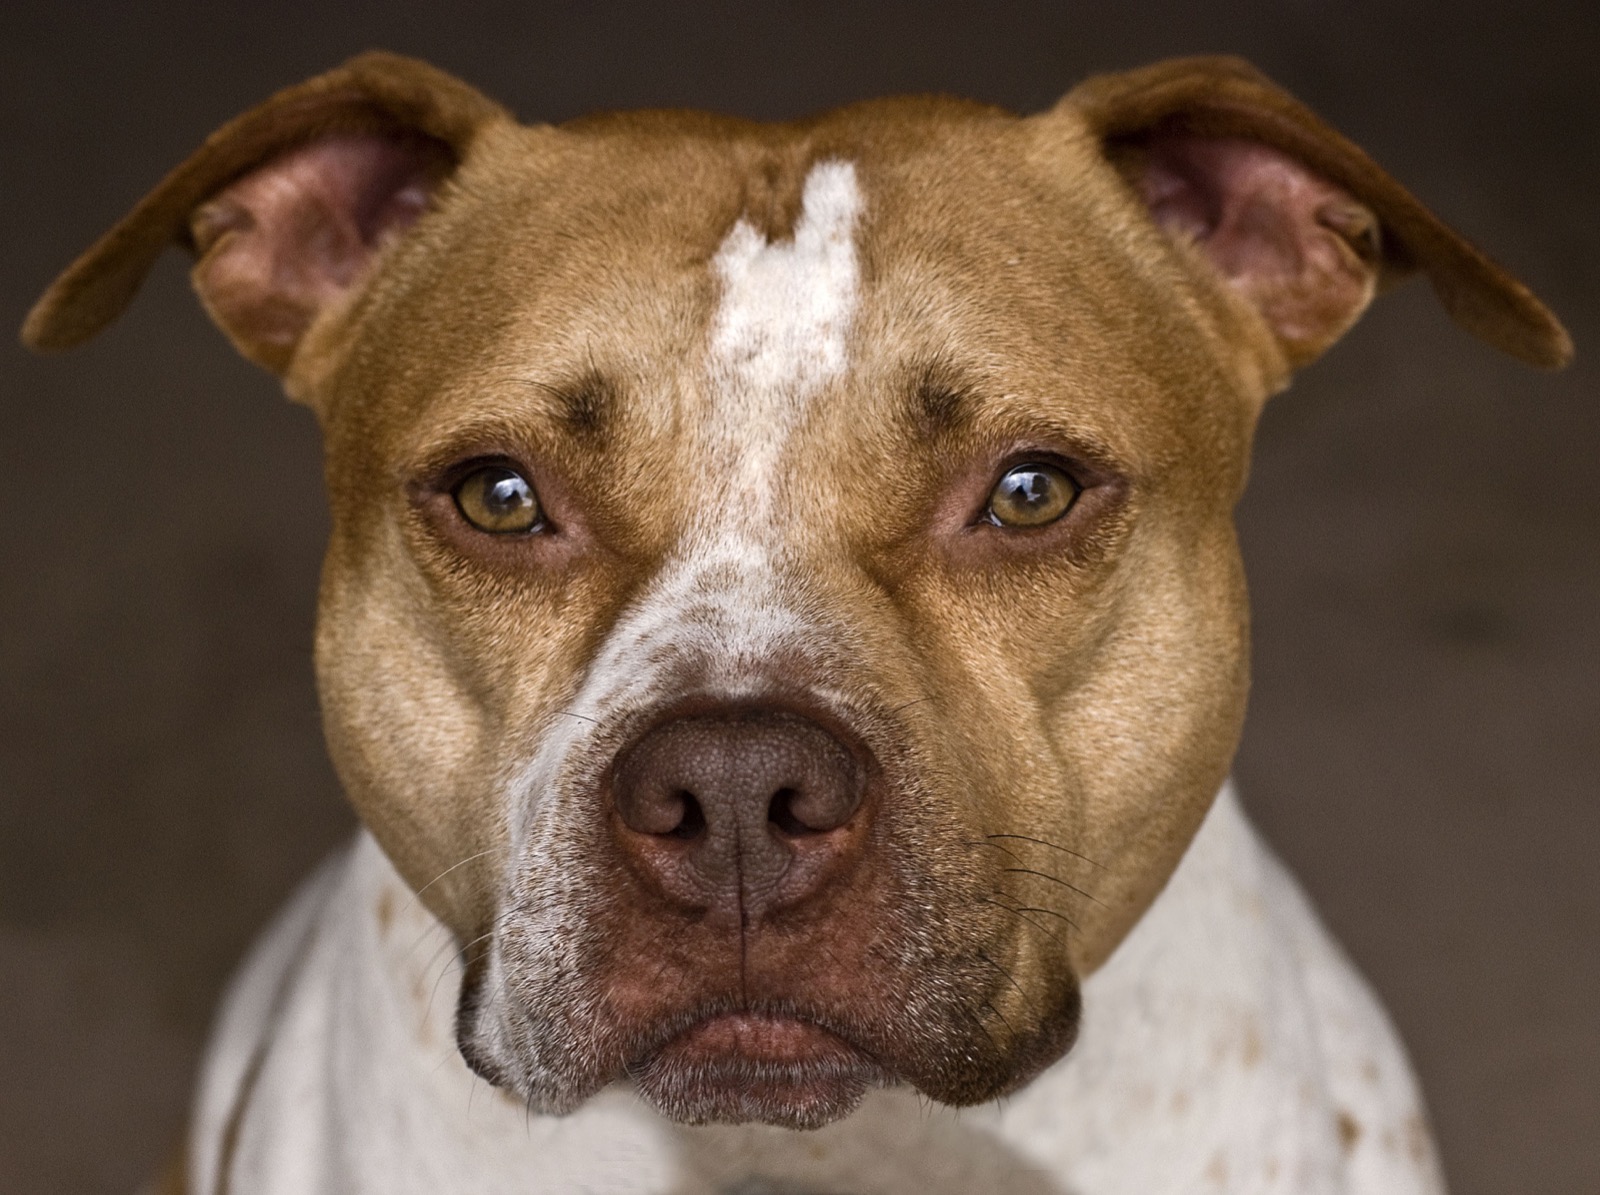 This Animal Quiz Might Not Be Hardest 1 You've Ever Taken, But It Certainly Isn't Easy American pit bull terrier